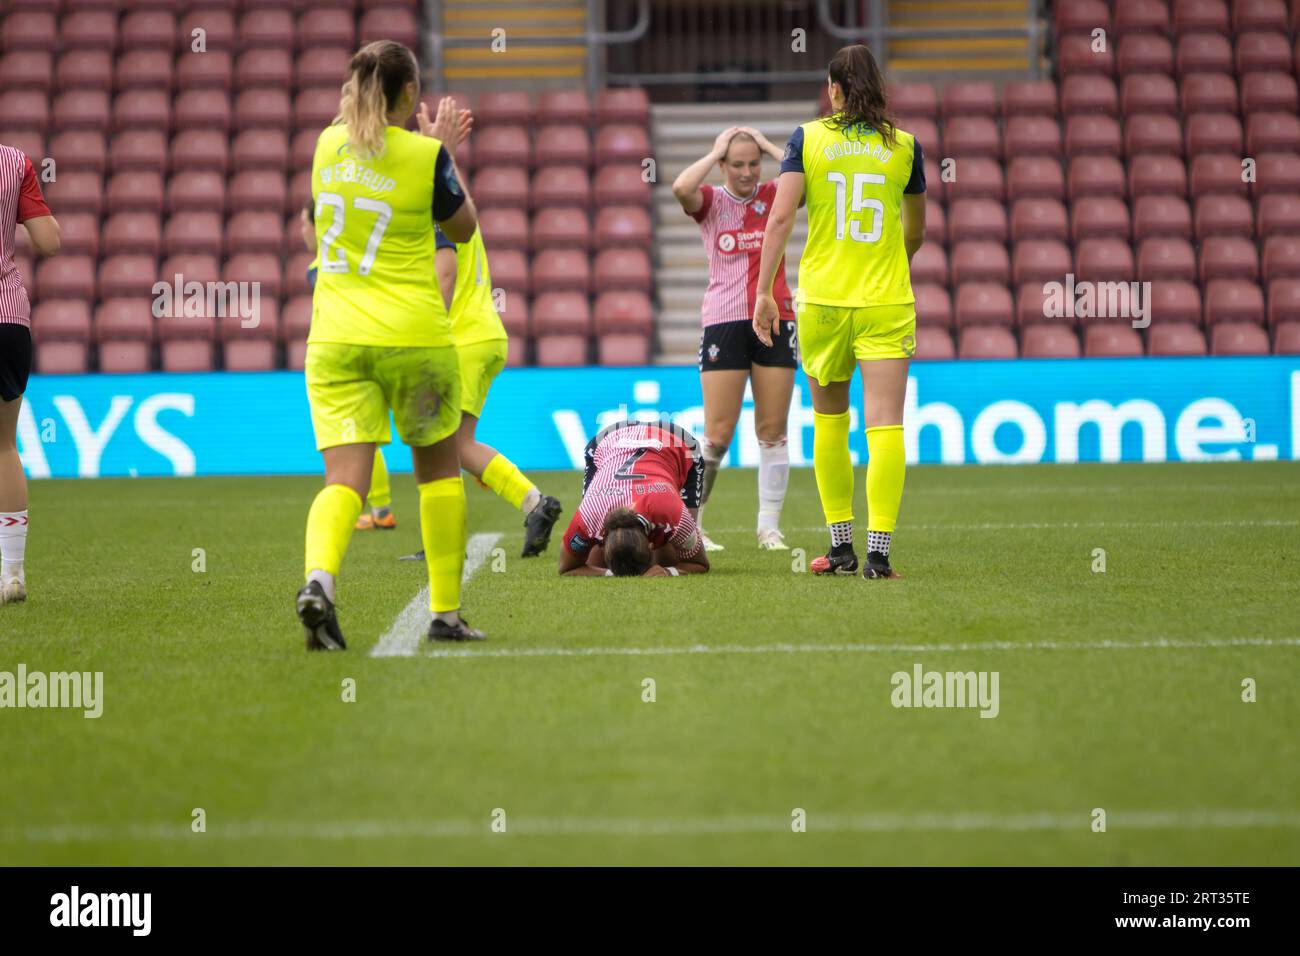 Southampton, UK. 10th Sep, 2023. Lexi Lloyd Smith (7 Southampton) with her  head in her hands during the Barclays Womens Championship game between  Southampton and Sunderland at St Marys Stadium, Southampton. (Tom